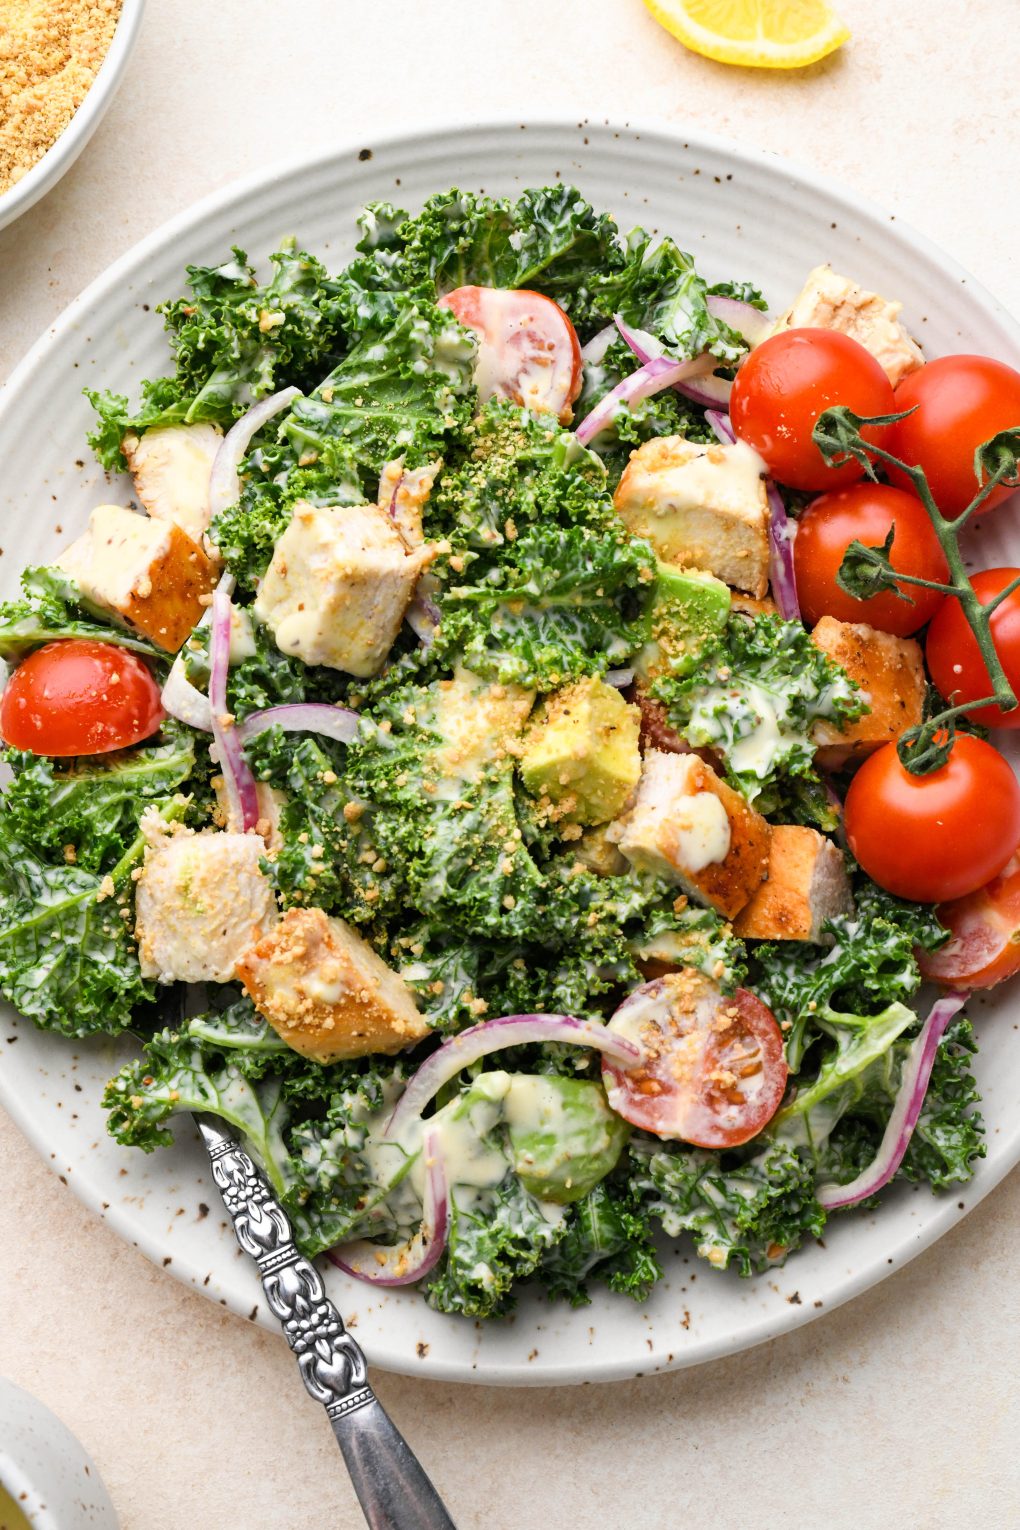 A single serving of Kale Chicken Caesar Salad on a small ceramic speckled plate, on a light colored cream background.